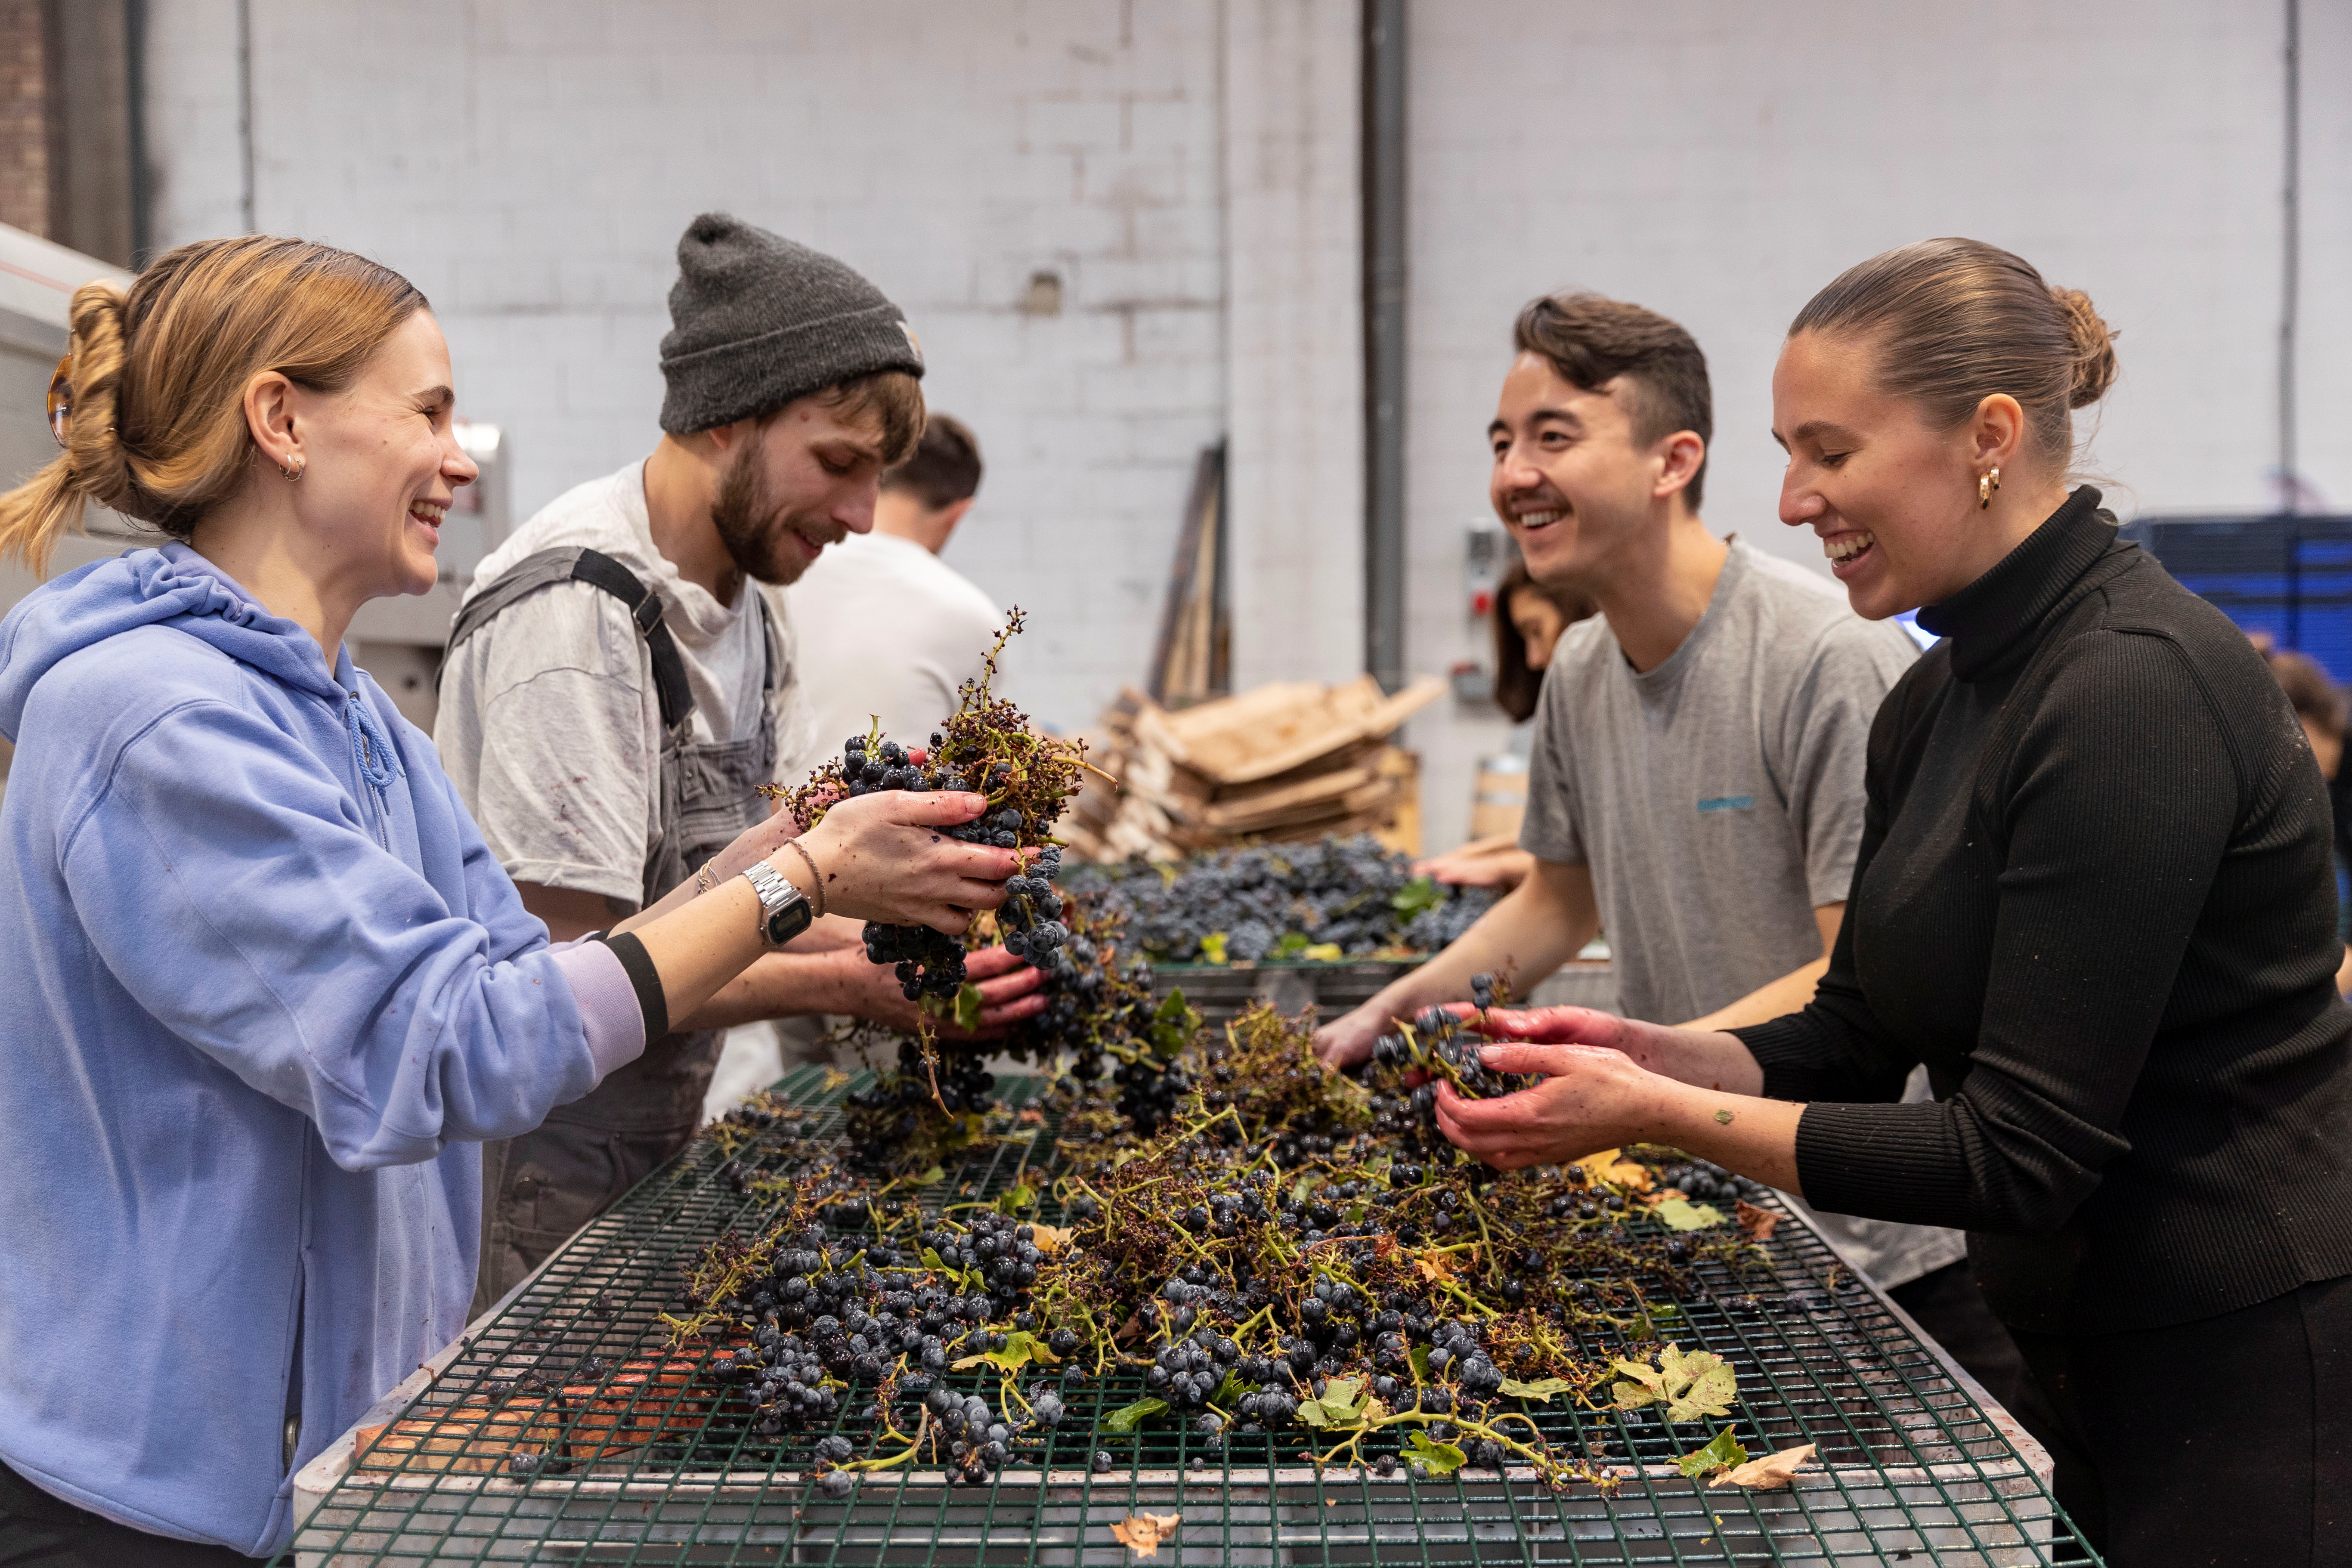 Volunteers de-stem grapes by hand at the Renegade Urban Winery in London